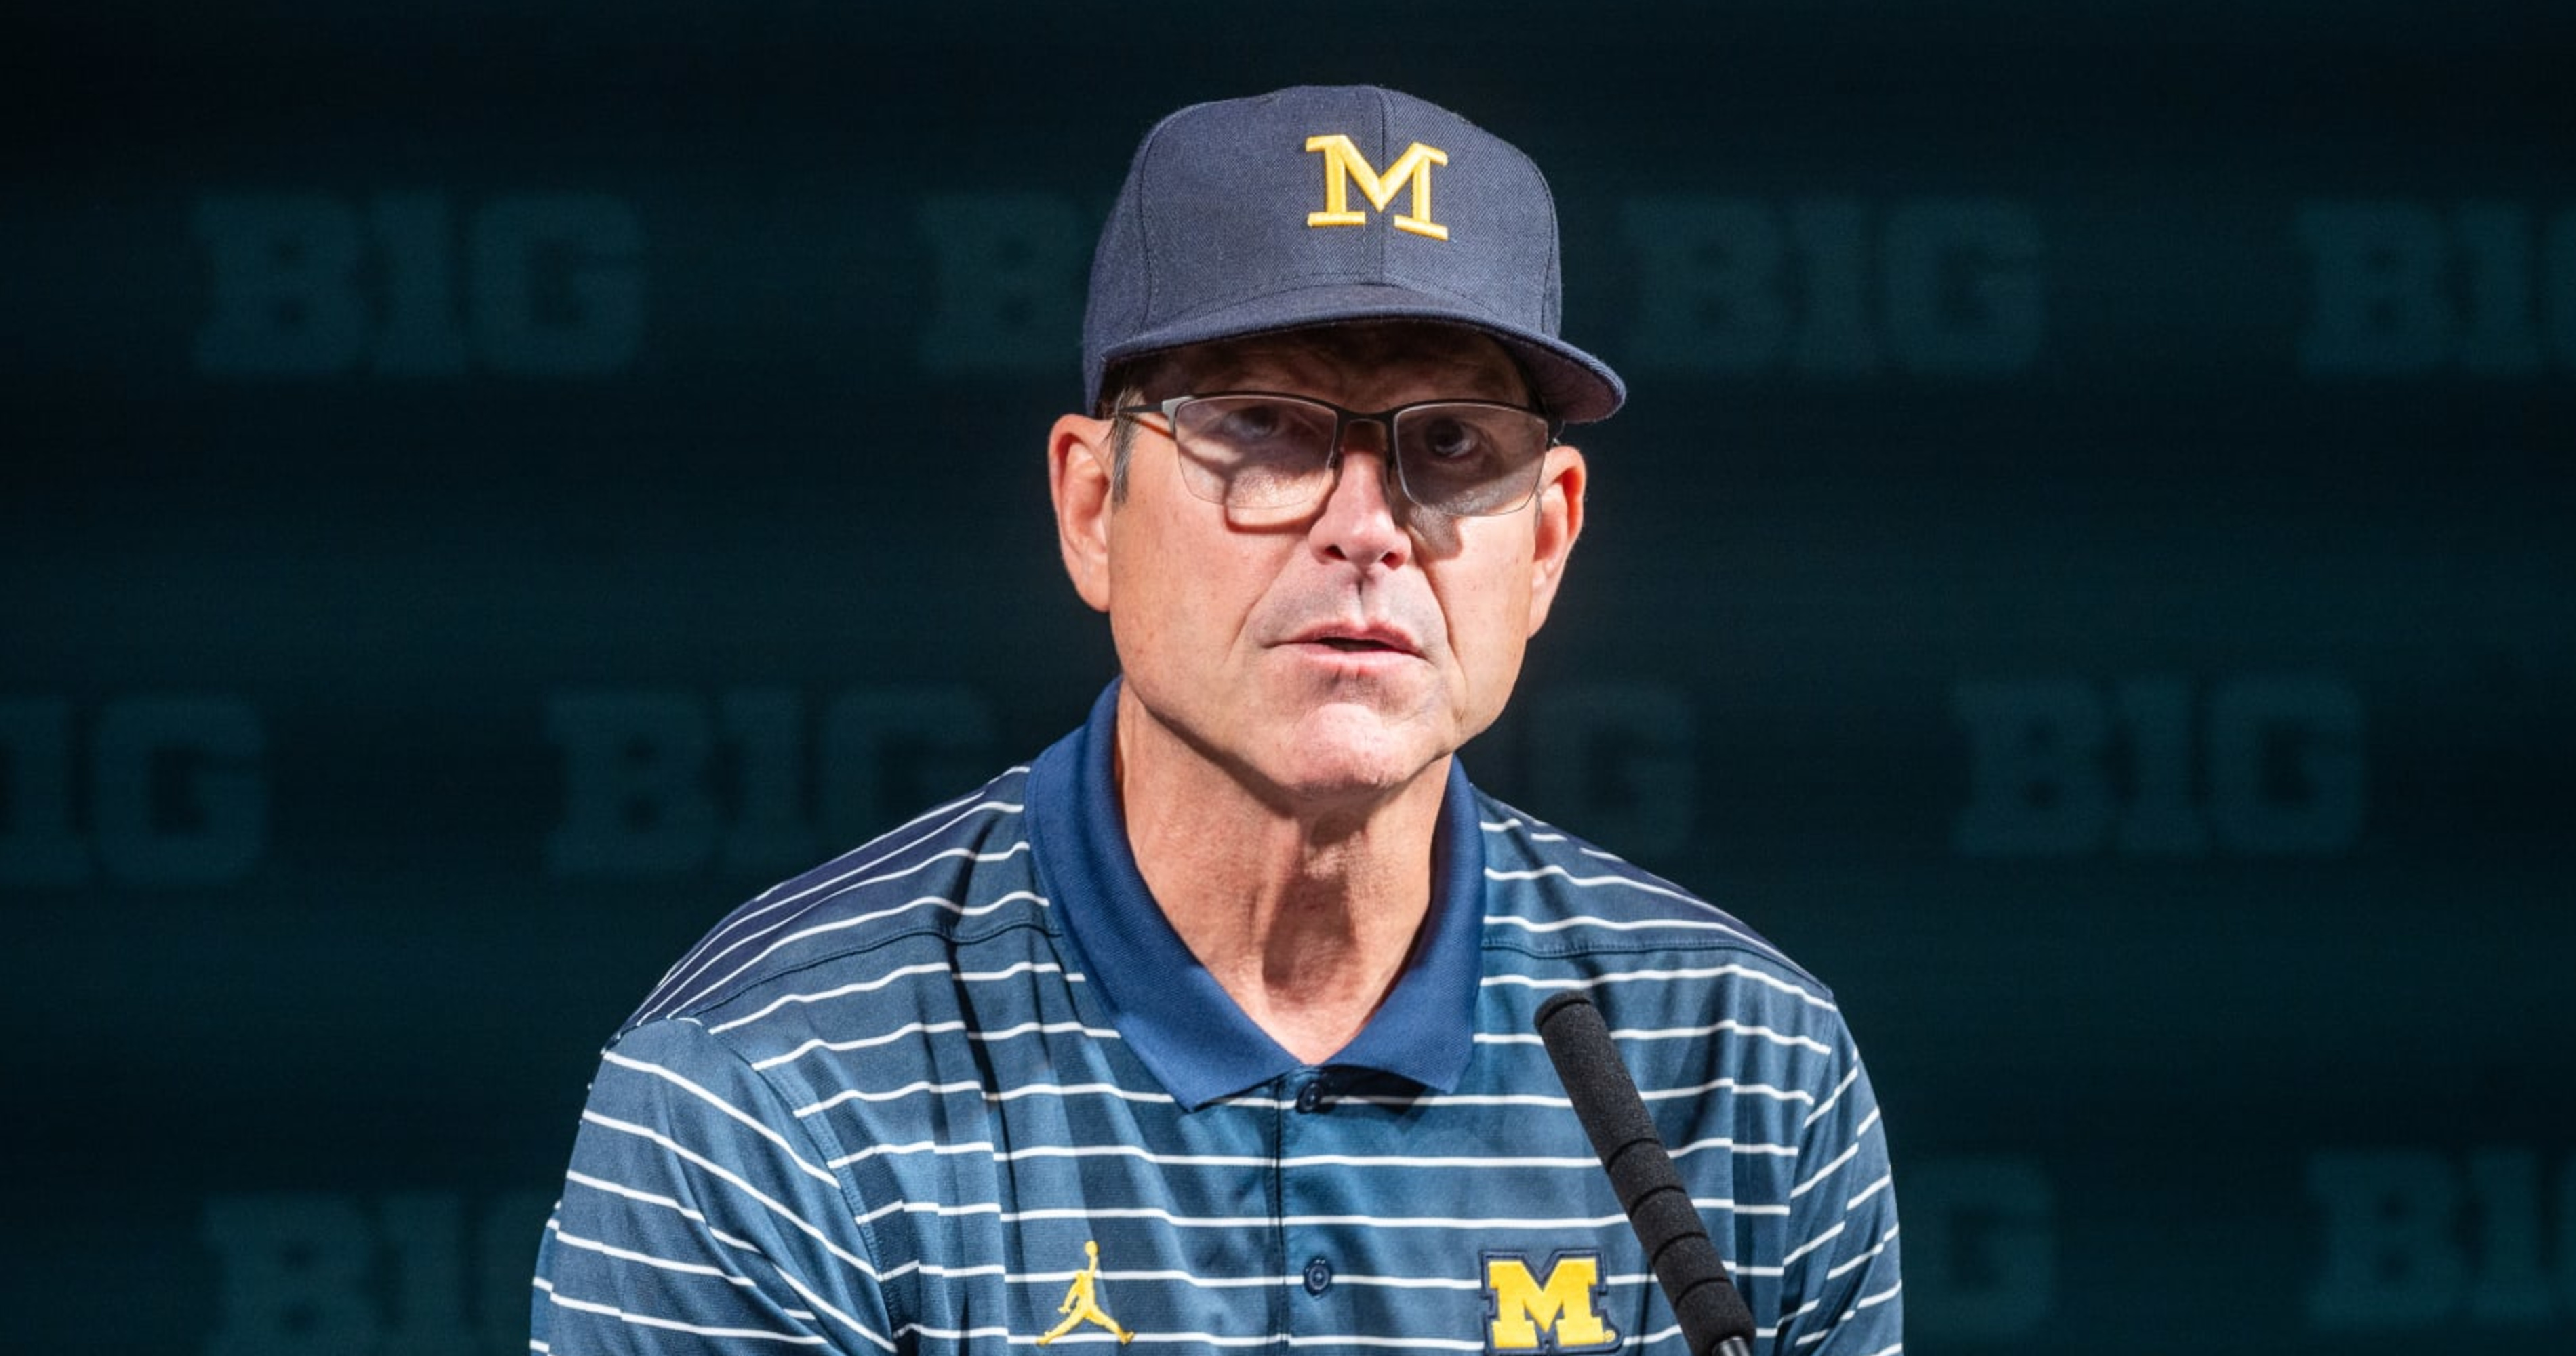 Jim Harbaugh's Suspension to Be Considered by CFP Committee If Michigan Loses